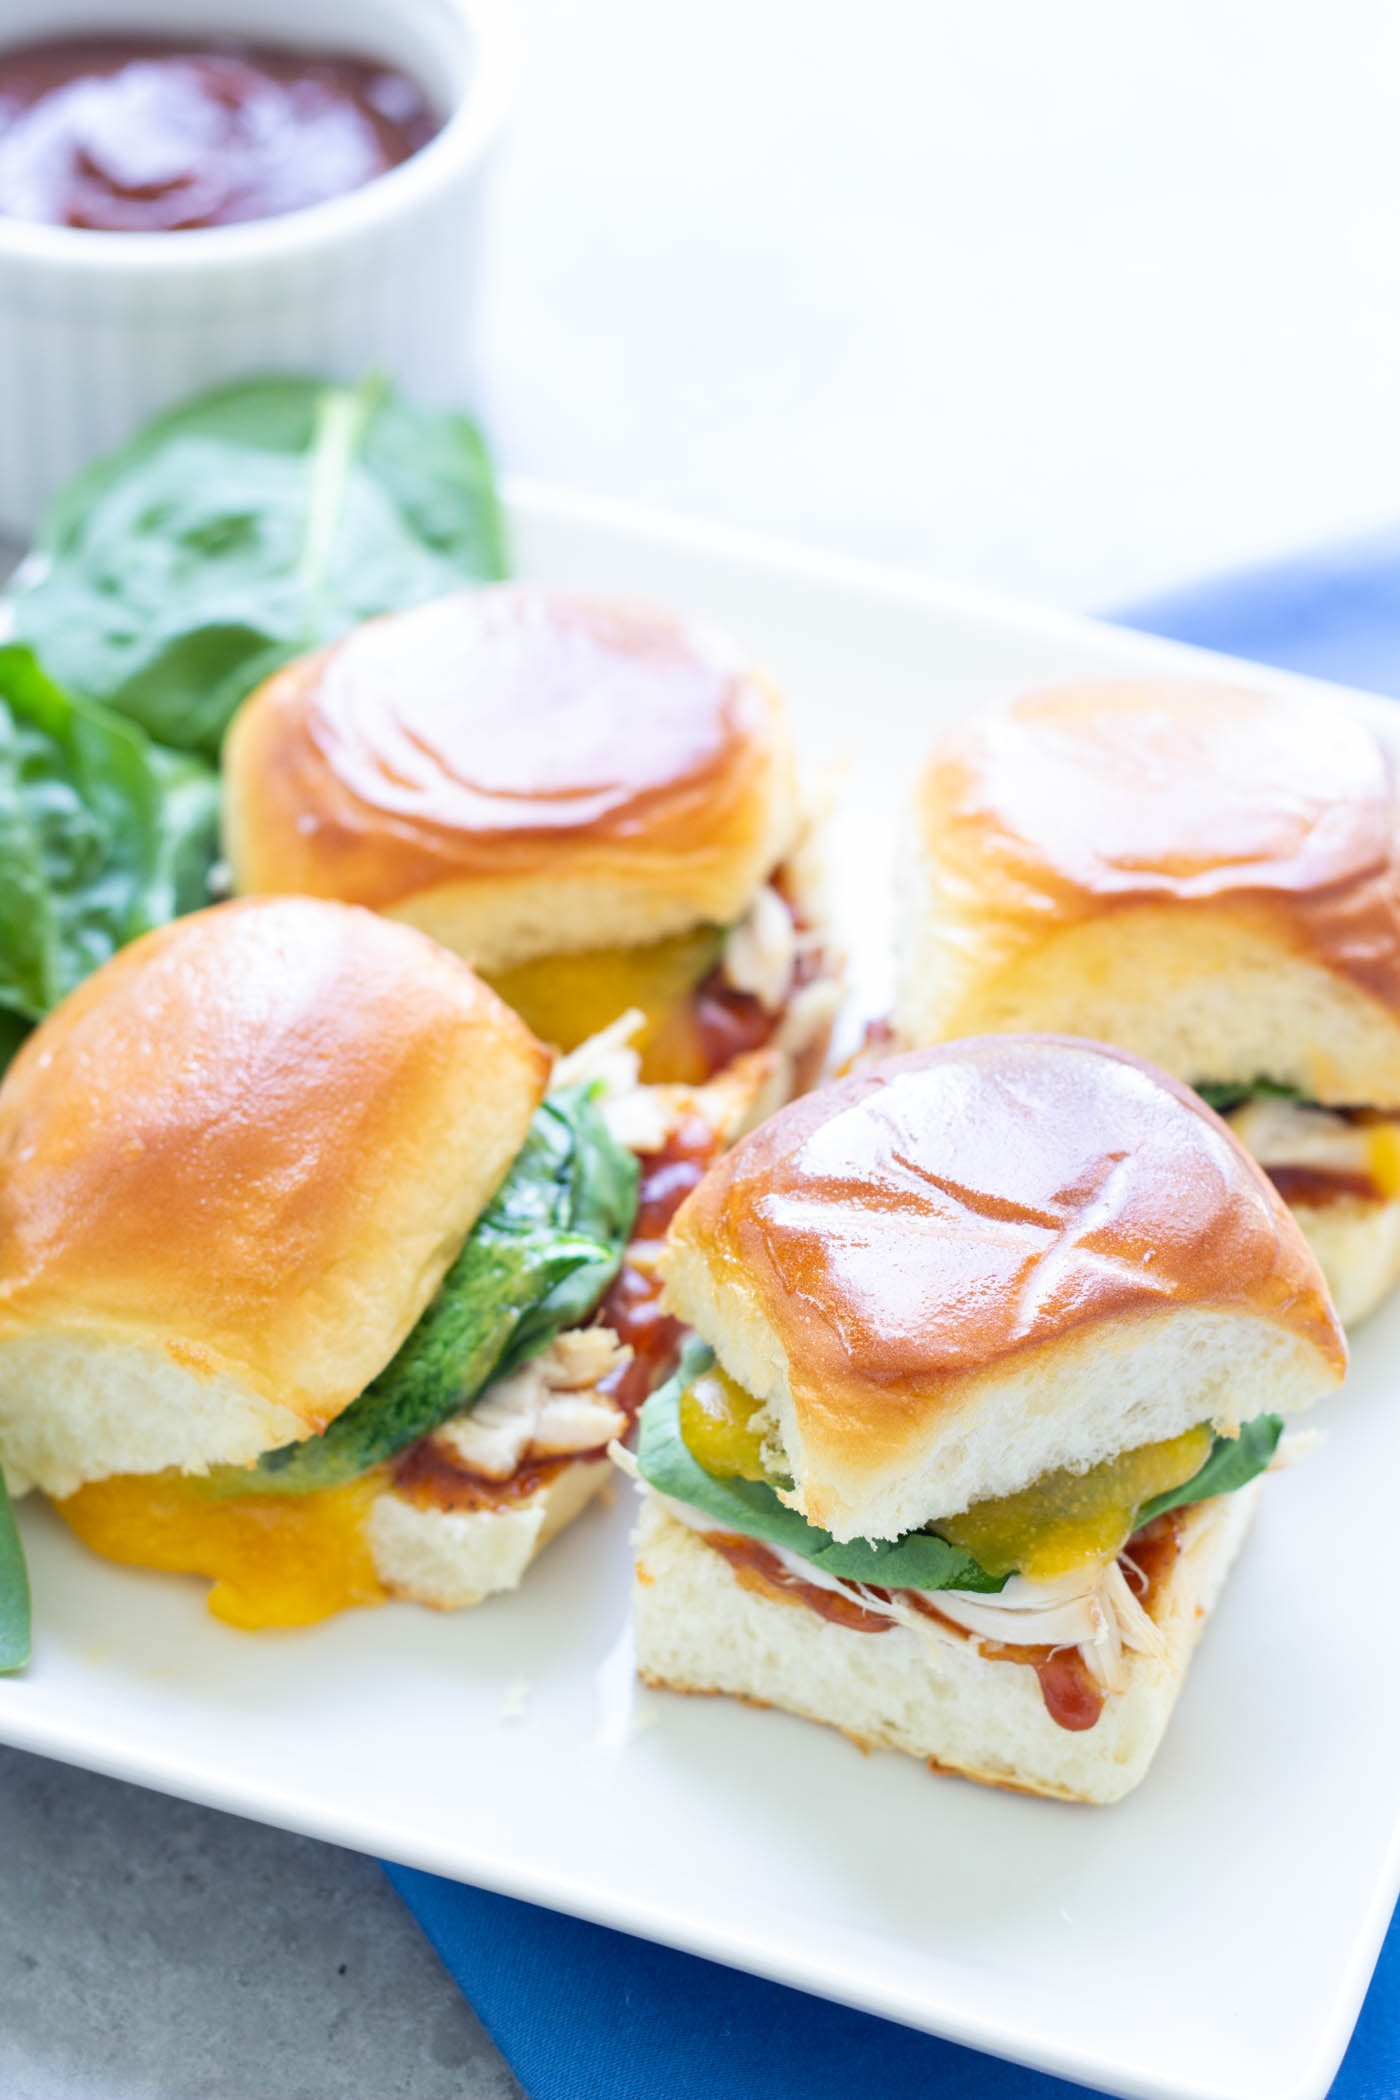 Four BBQ chicken sliders with spinach and cheddar cheese on a plate.